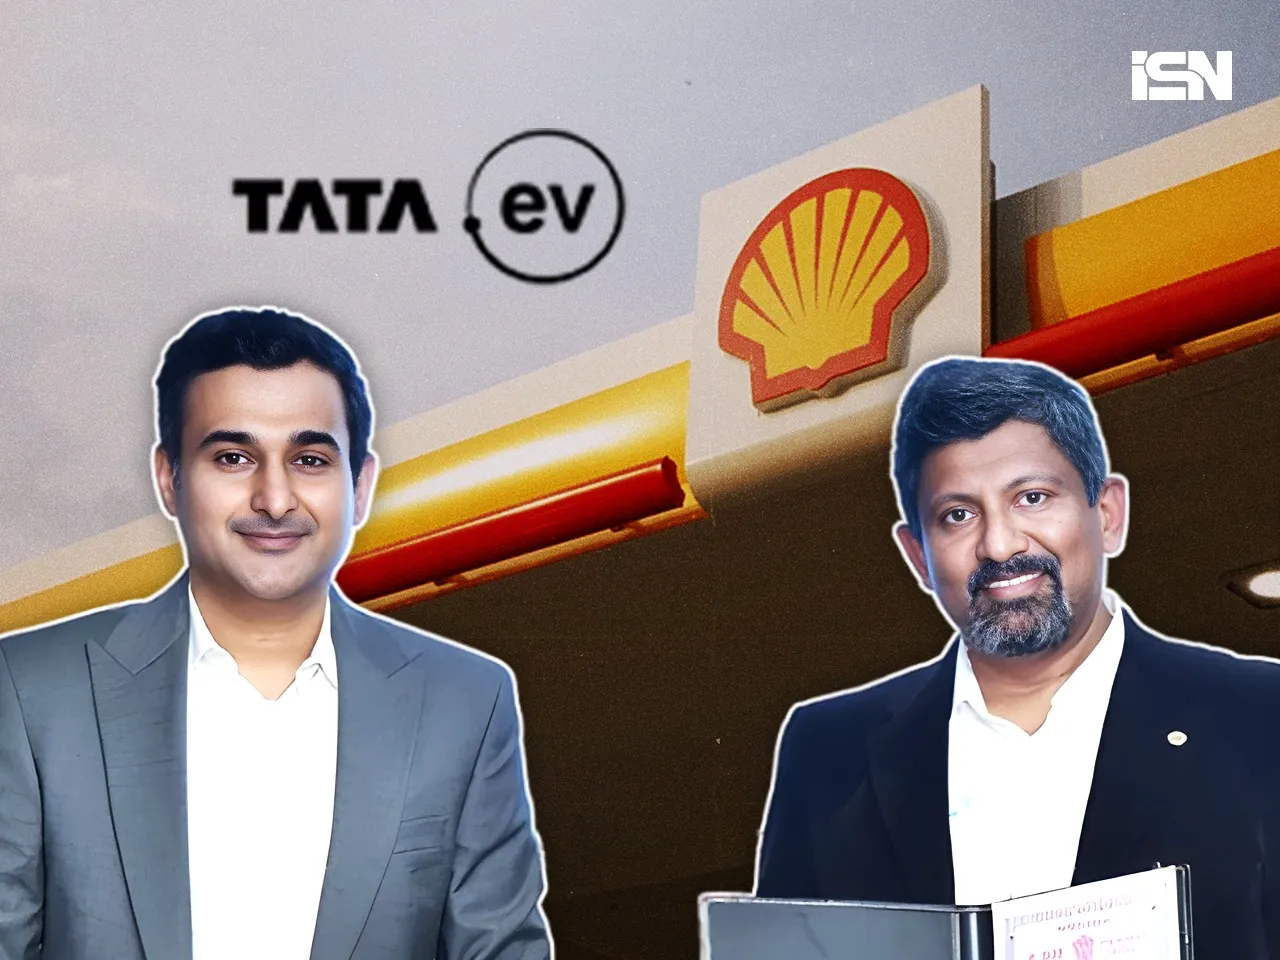 Tata partners with Shell India